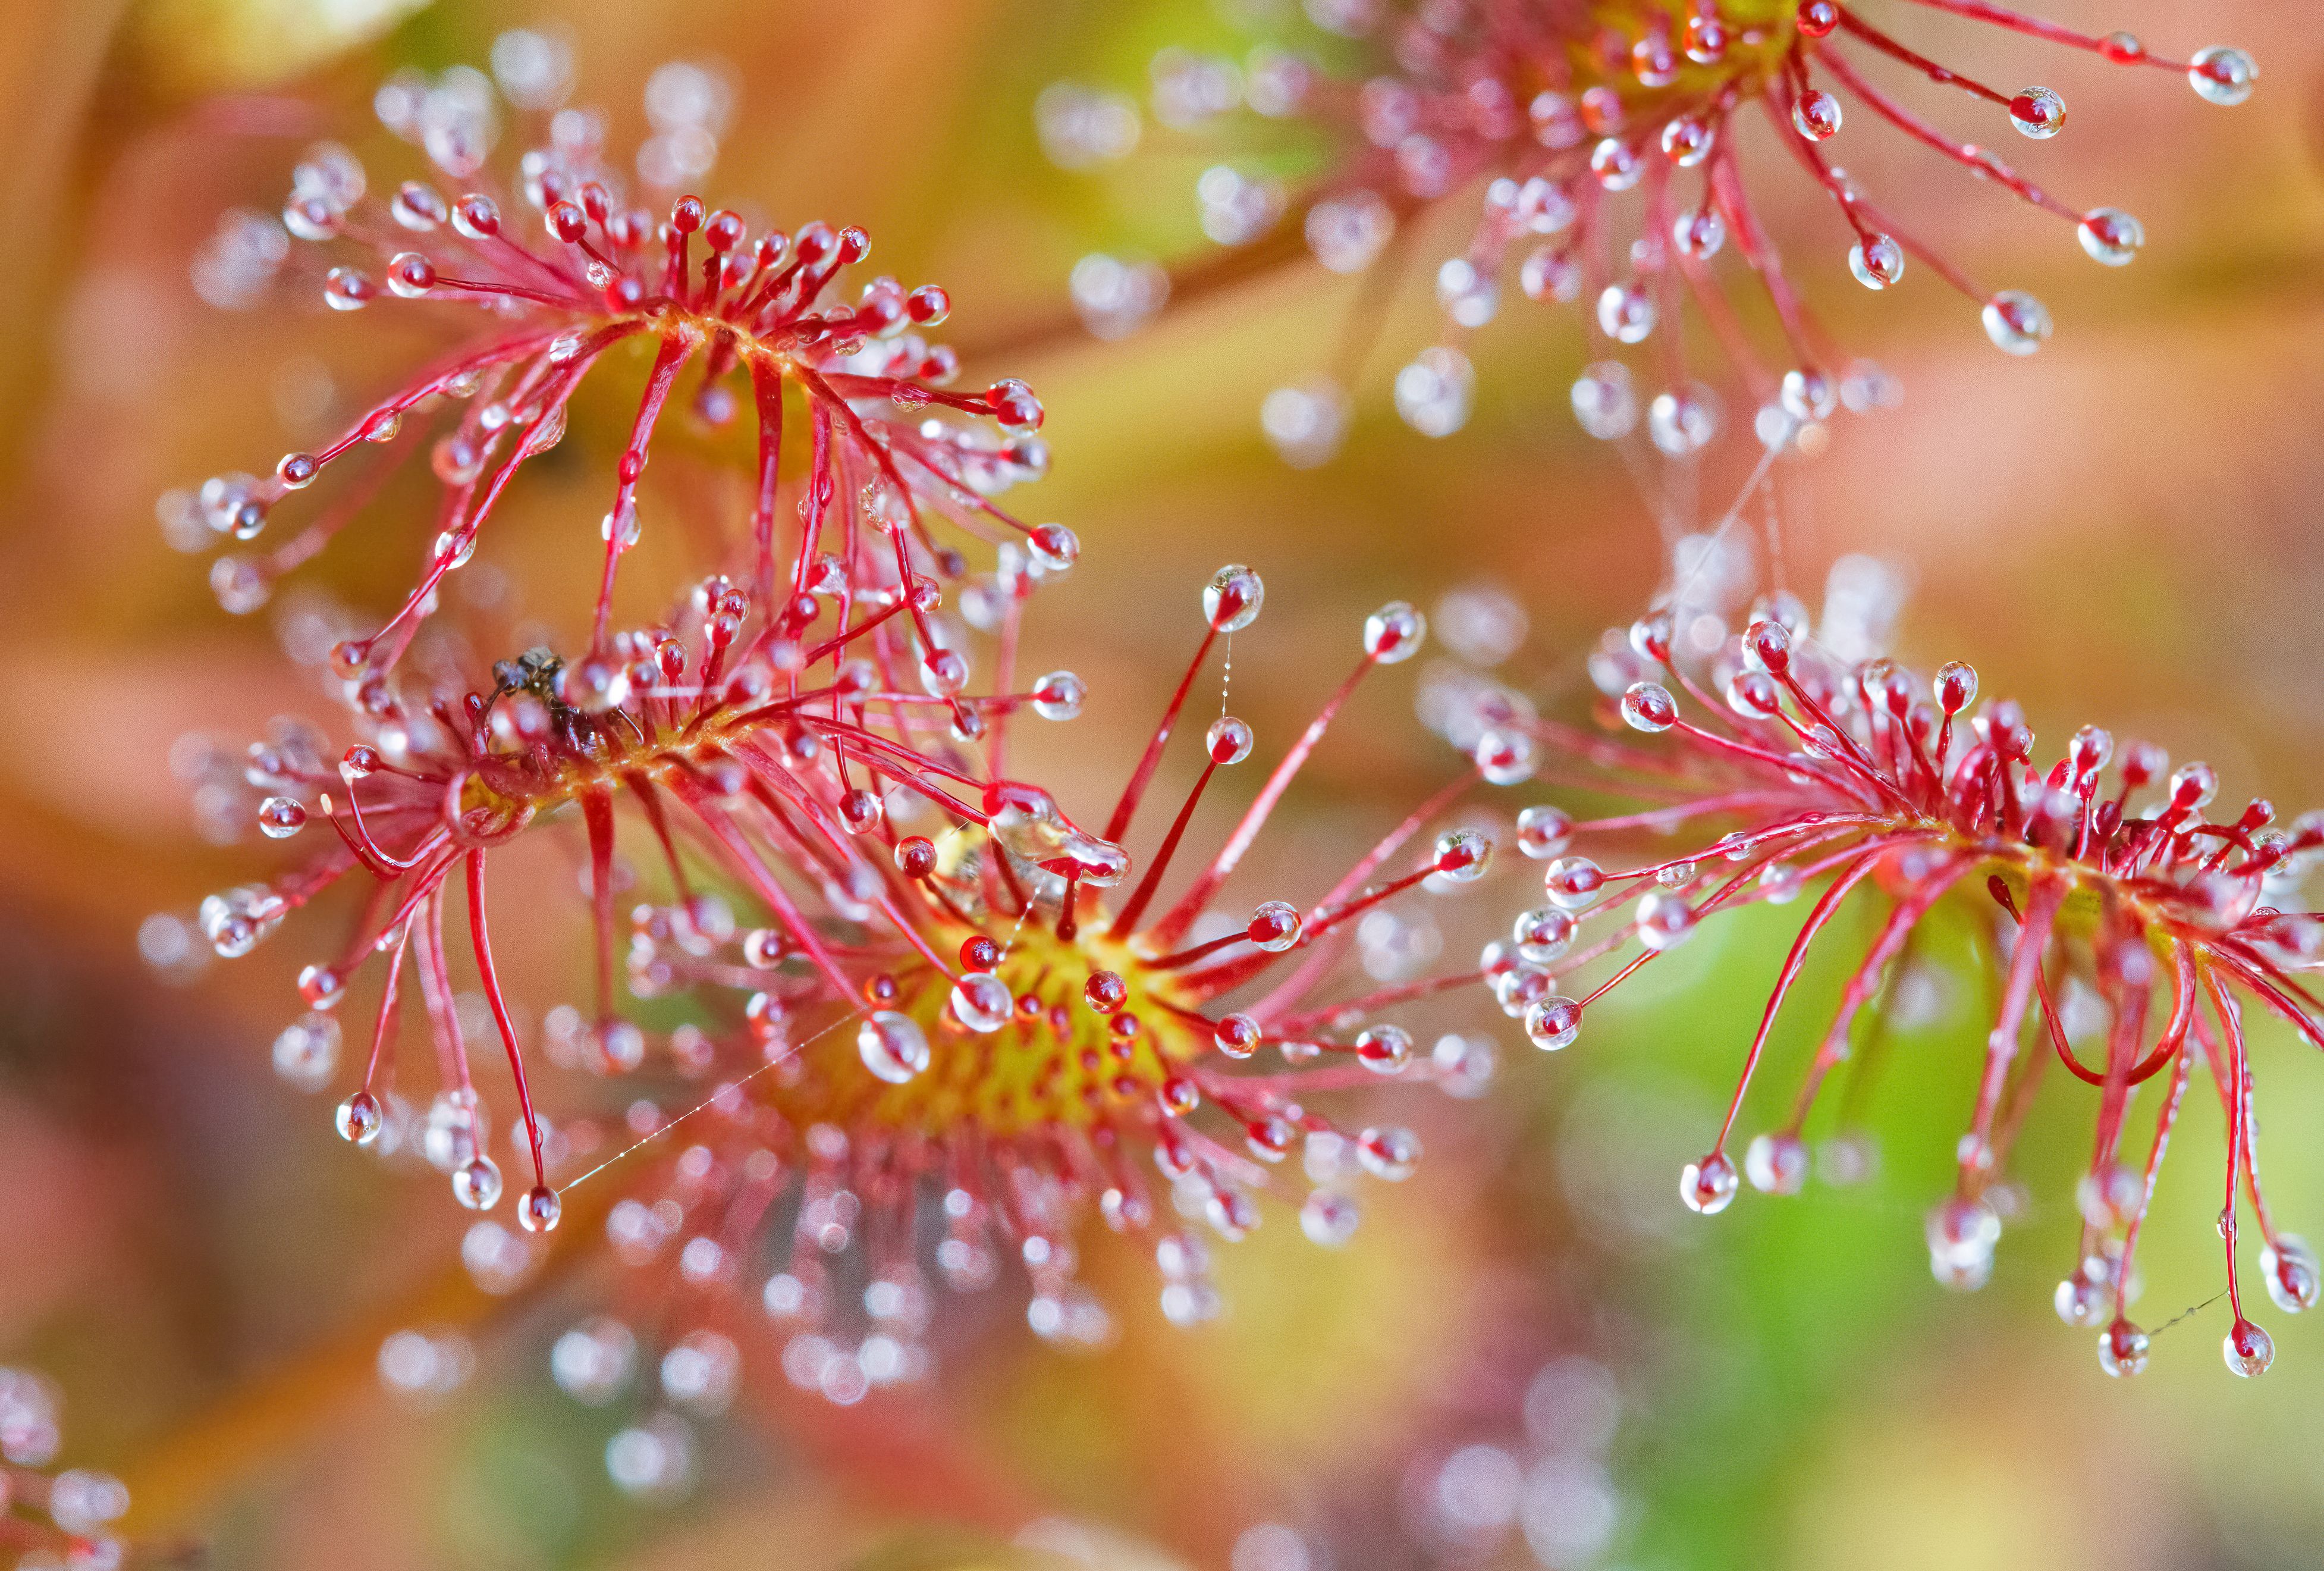 Photo of a Sundew plant by Cheryl Rose